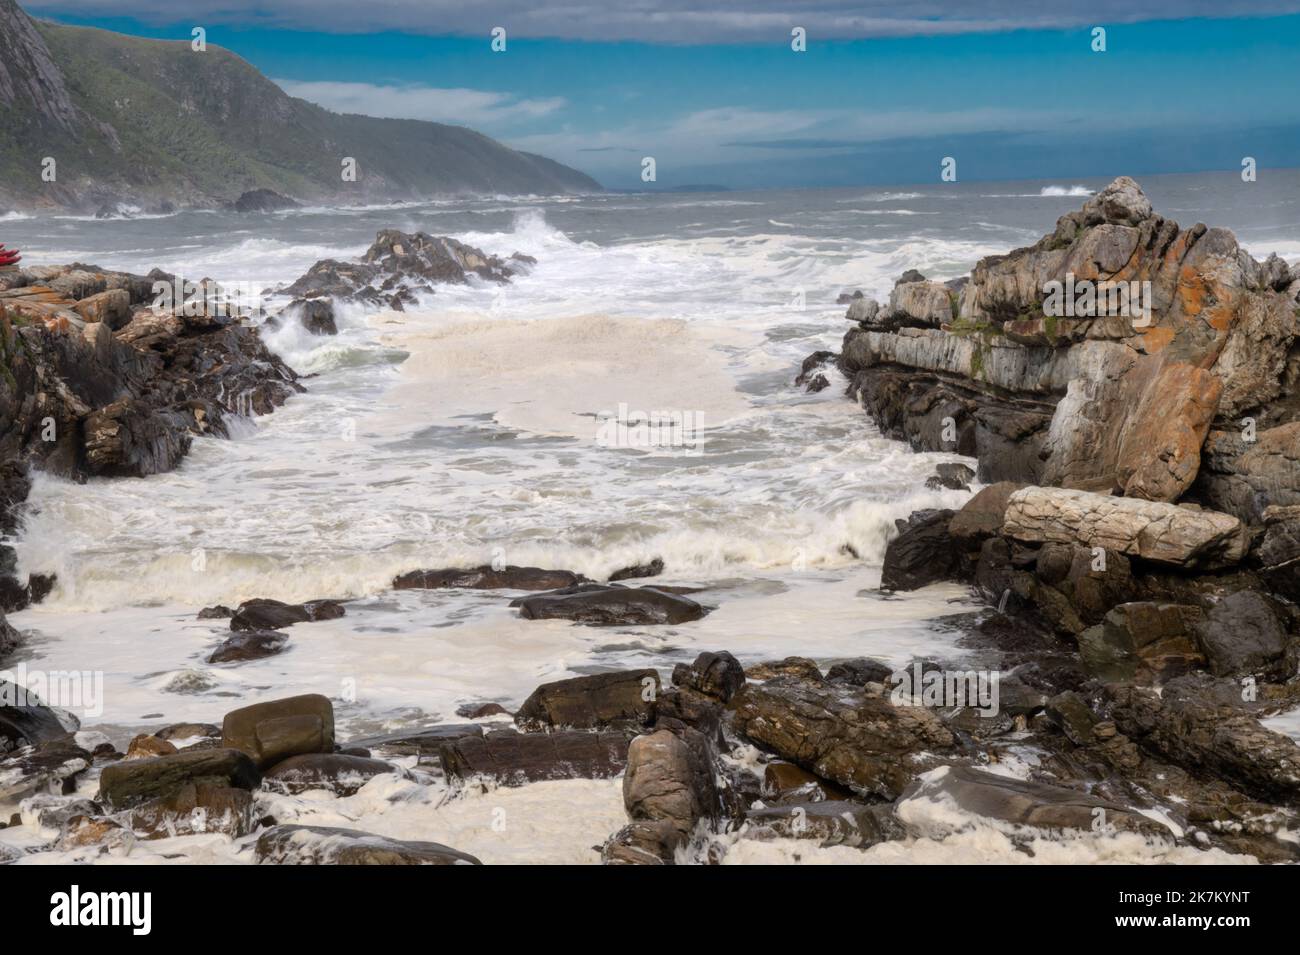 Tides in at Storms River with tide in and massive breakers crashing on the rocky shoreline. Low shutter speed with leading lines and foamy surf Stock Photo